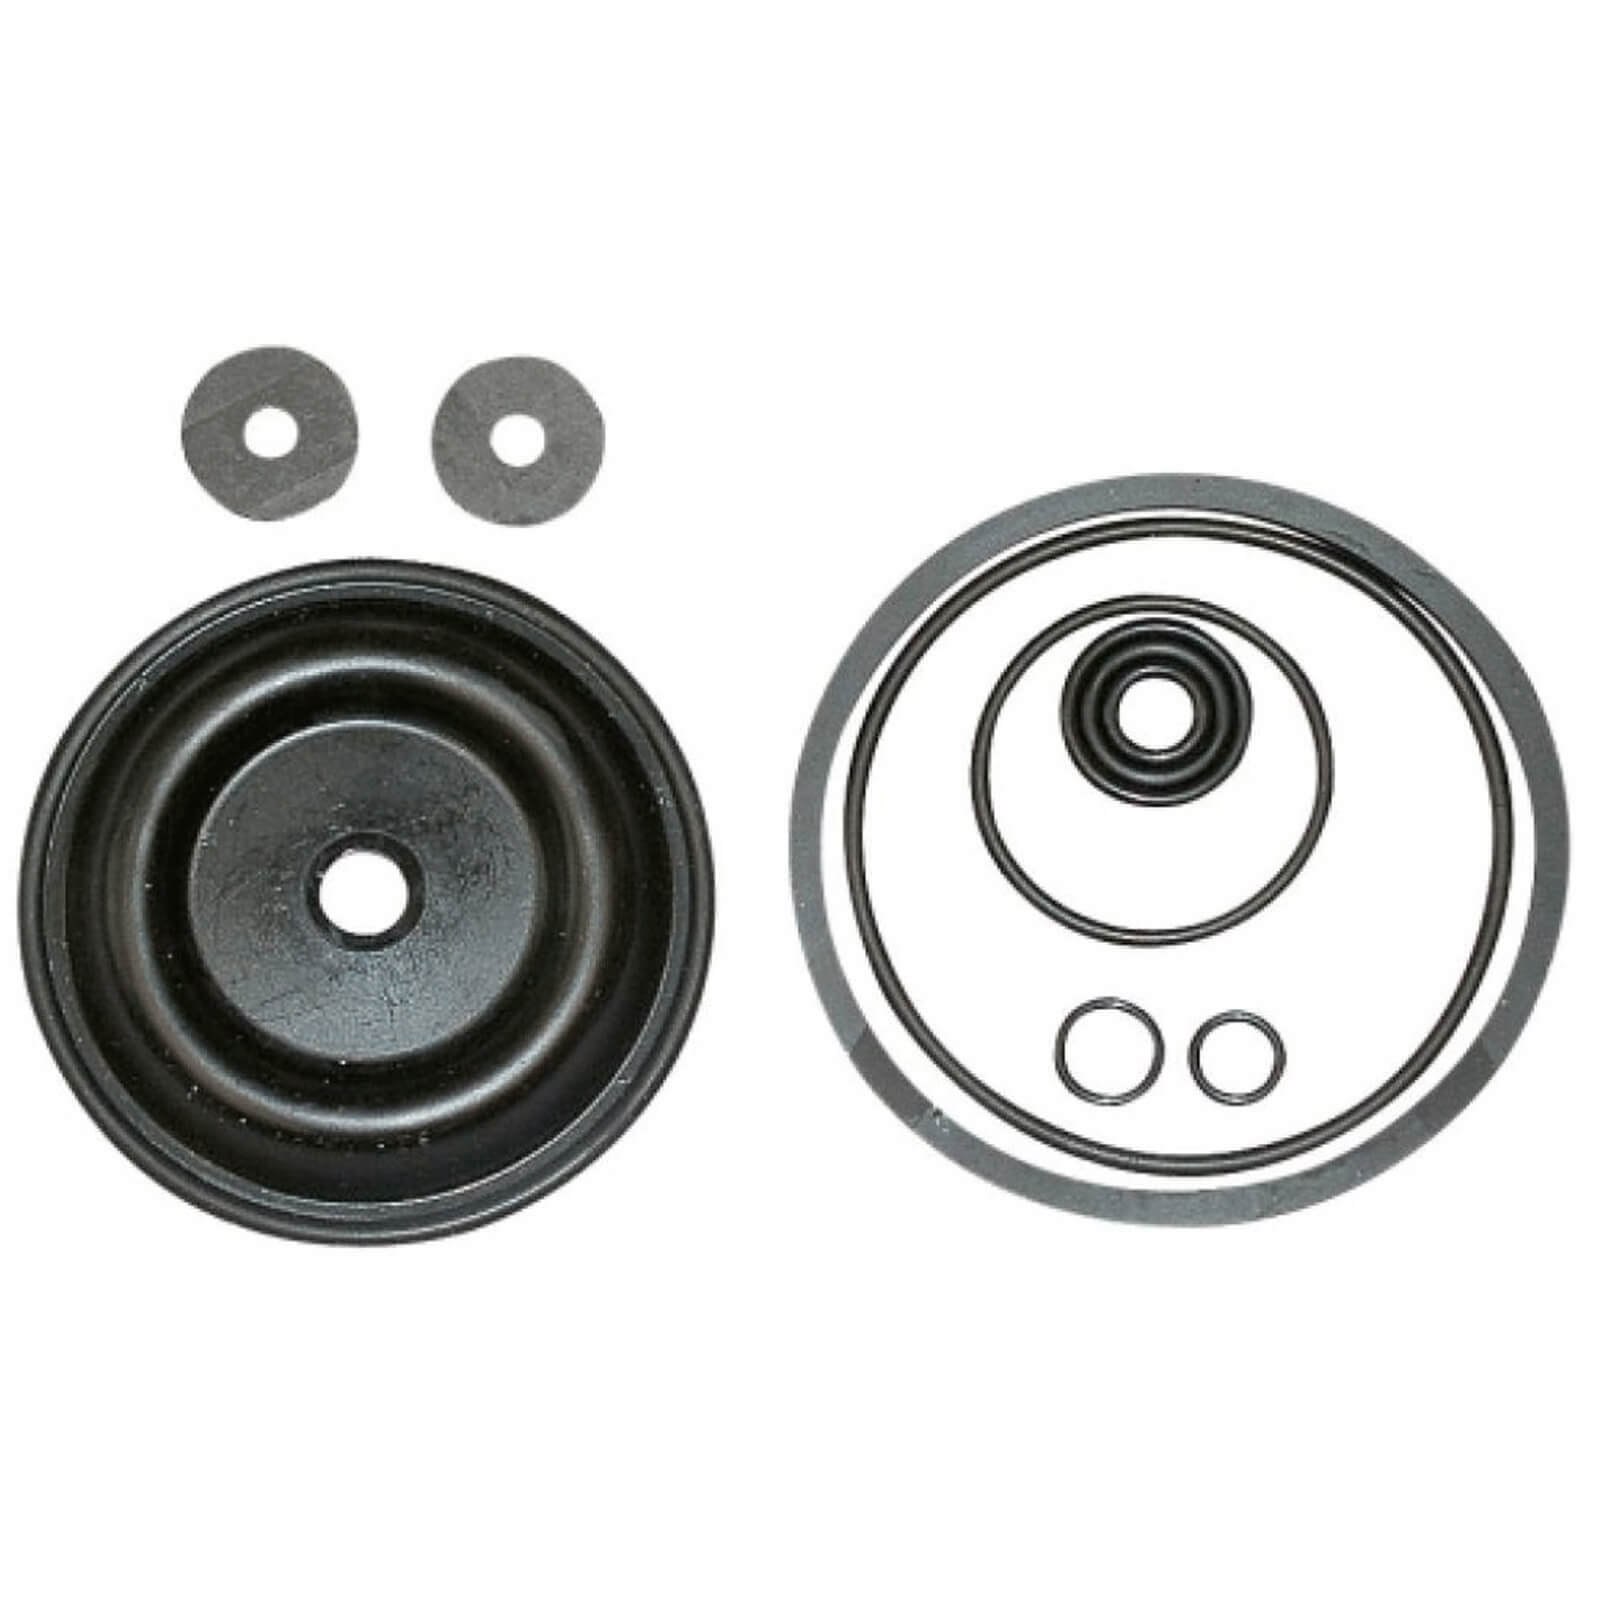 Image of Solo Gasket Kit 475, 485 and 473D Pressure Sprayers